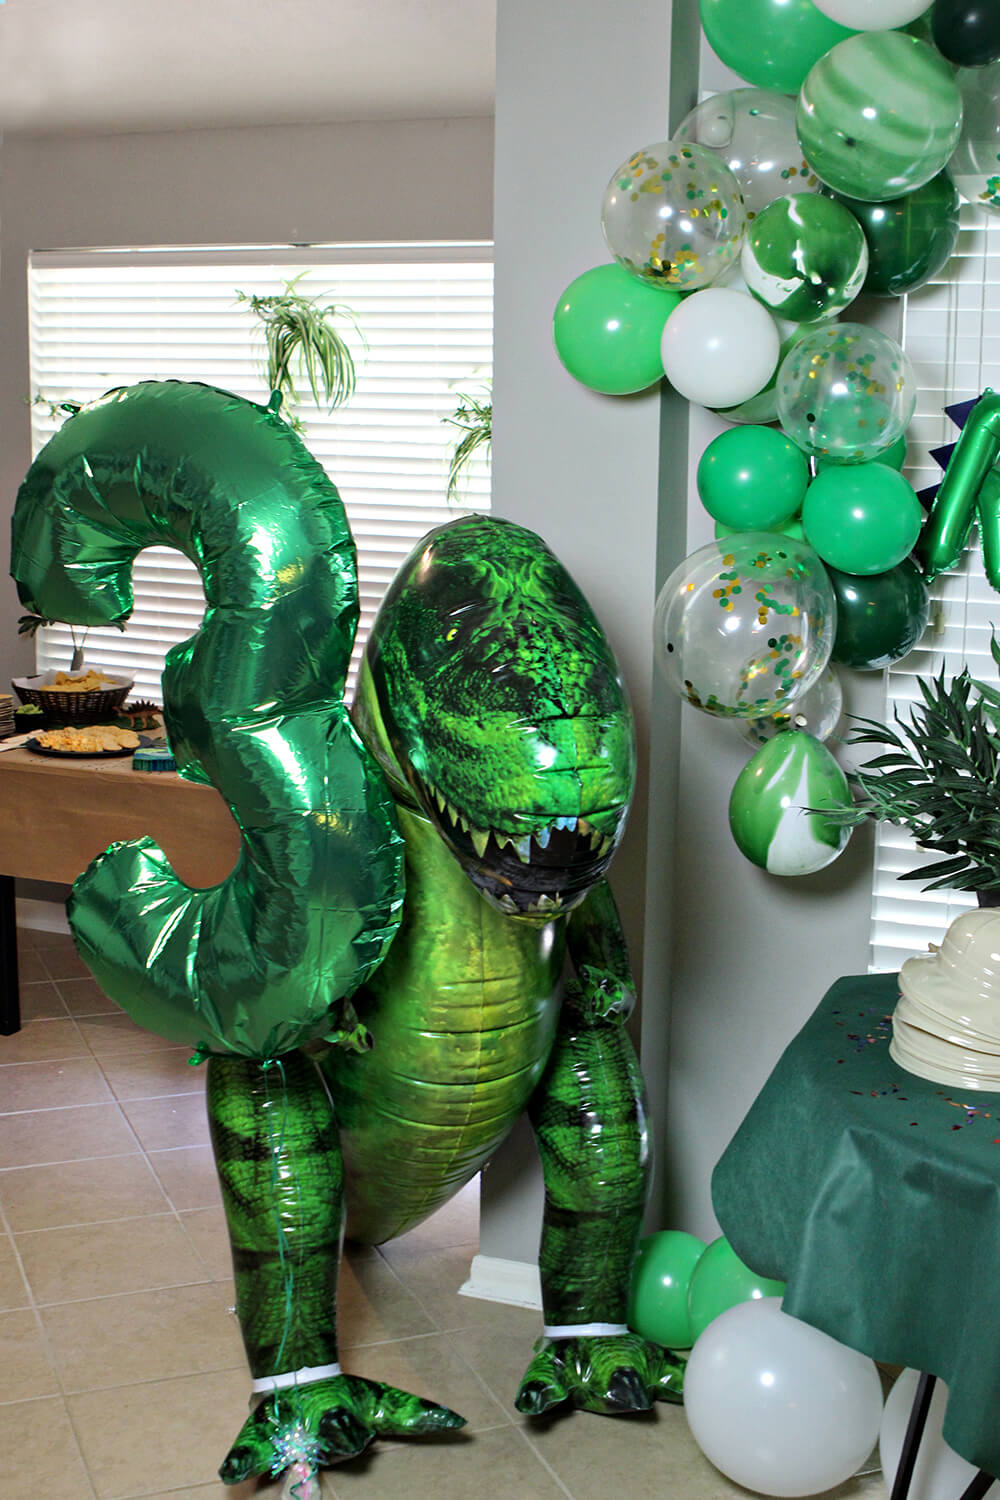 Dinosaur Party Games - by a Professional Party Planner